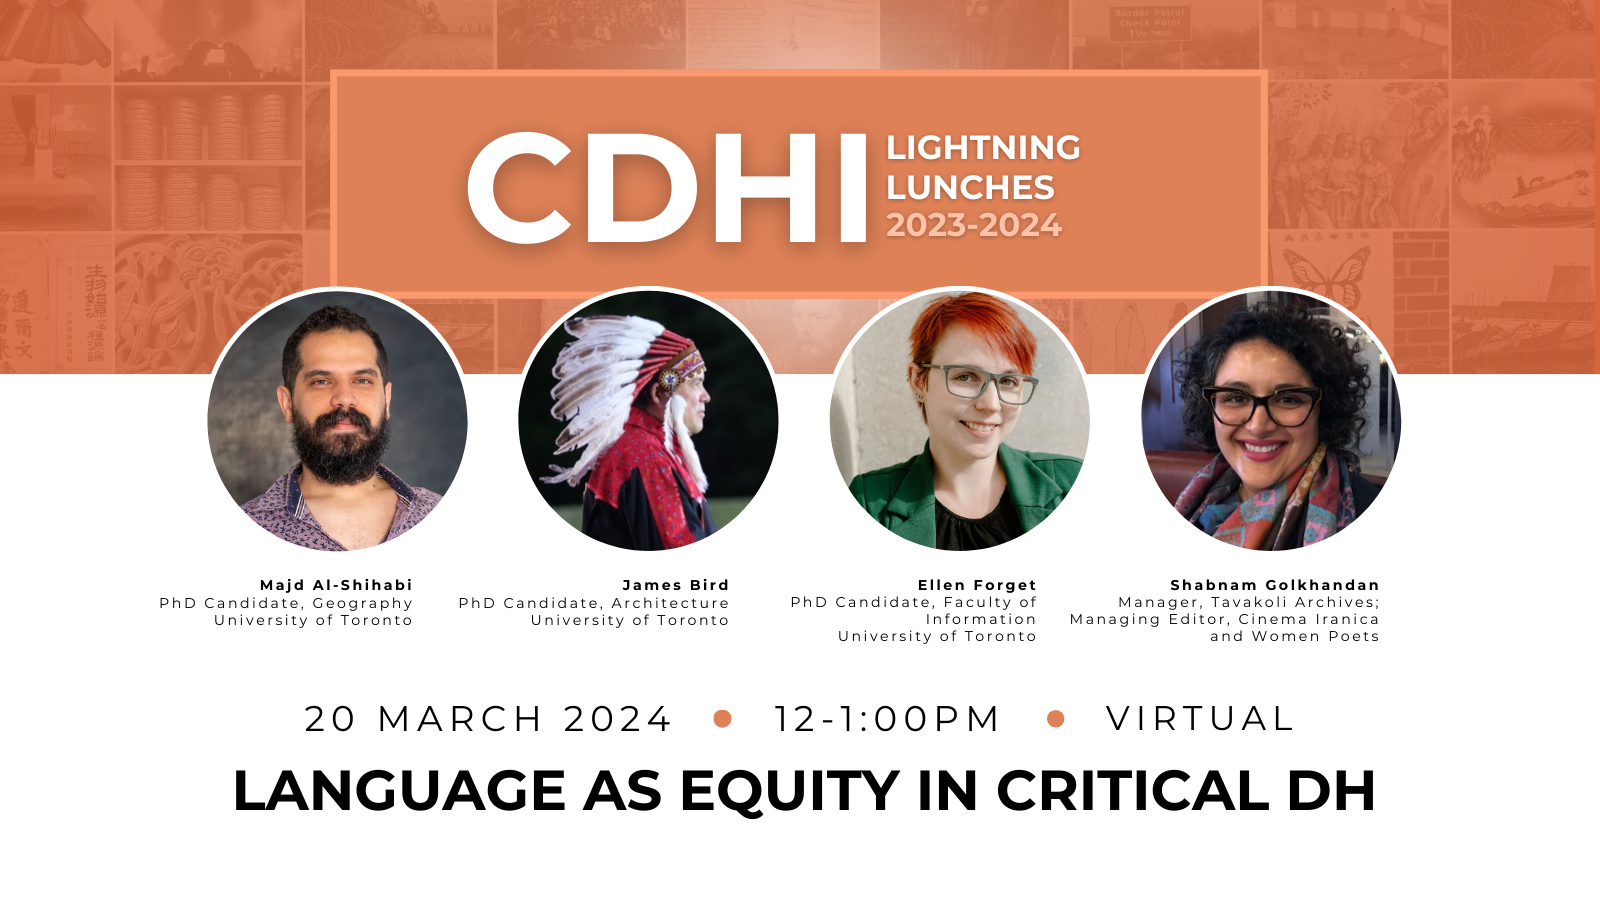 Language as Equity Lightning Lunch. 20 March 2024.